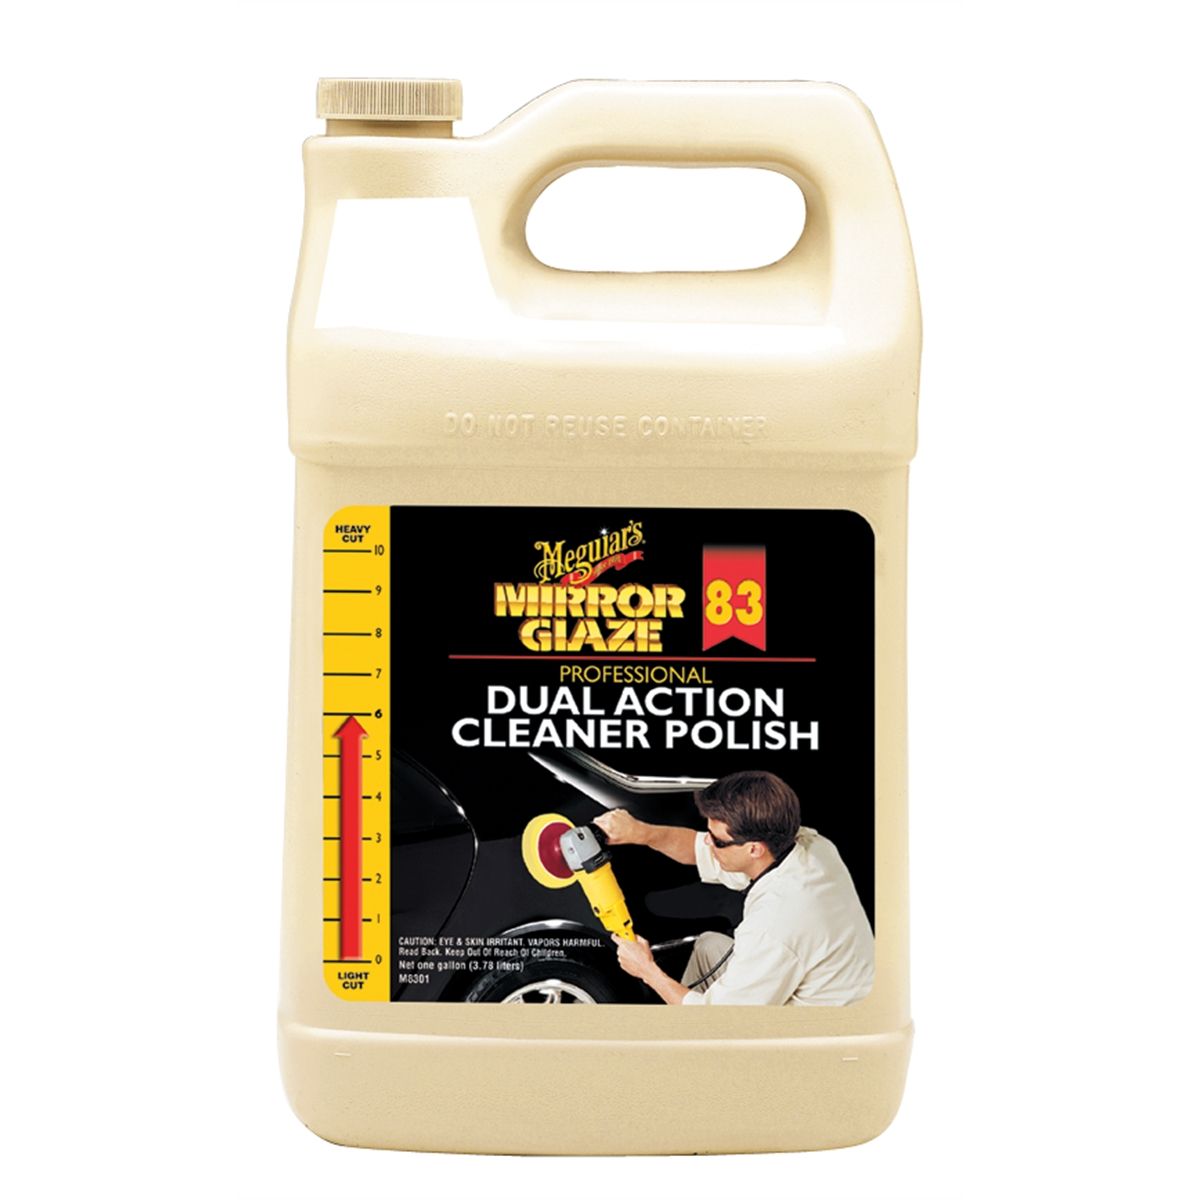 Meguiars M-8301 Dual Action Cleaner / Polish MGM-8301